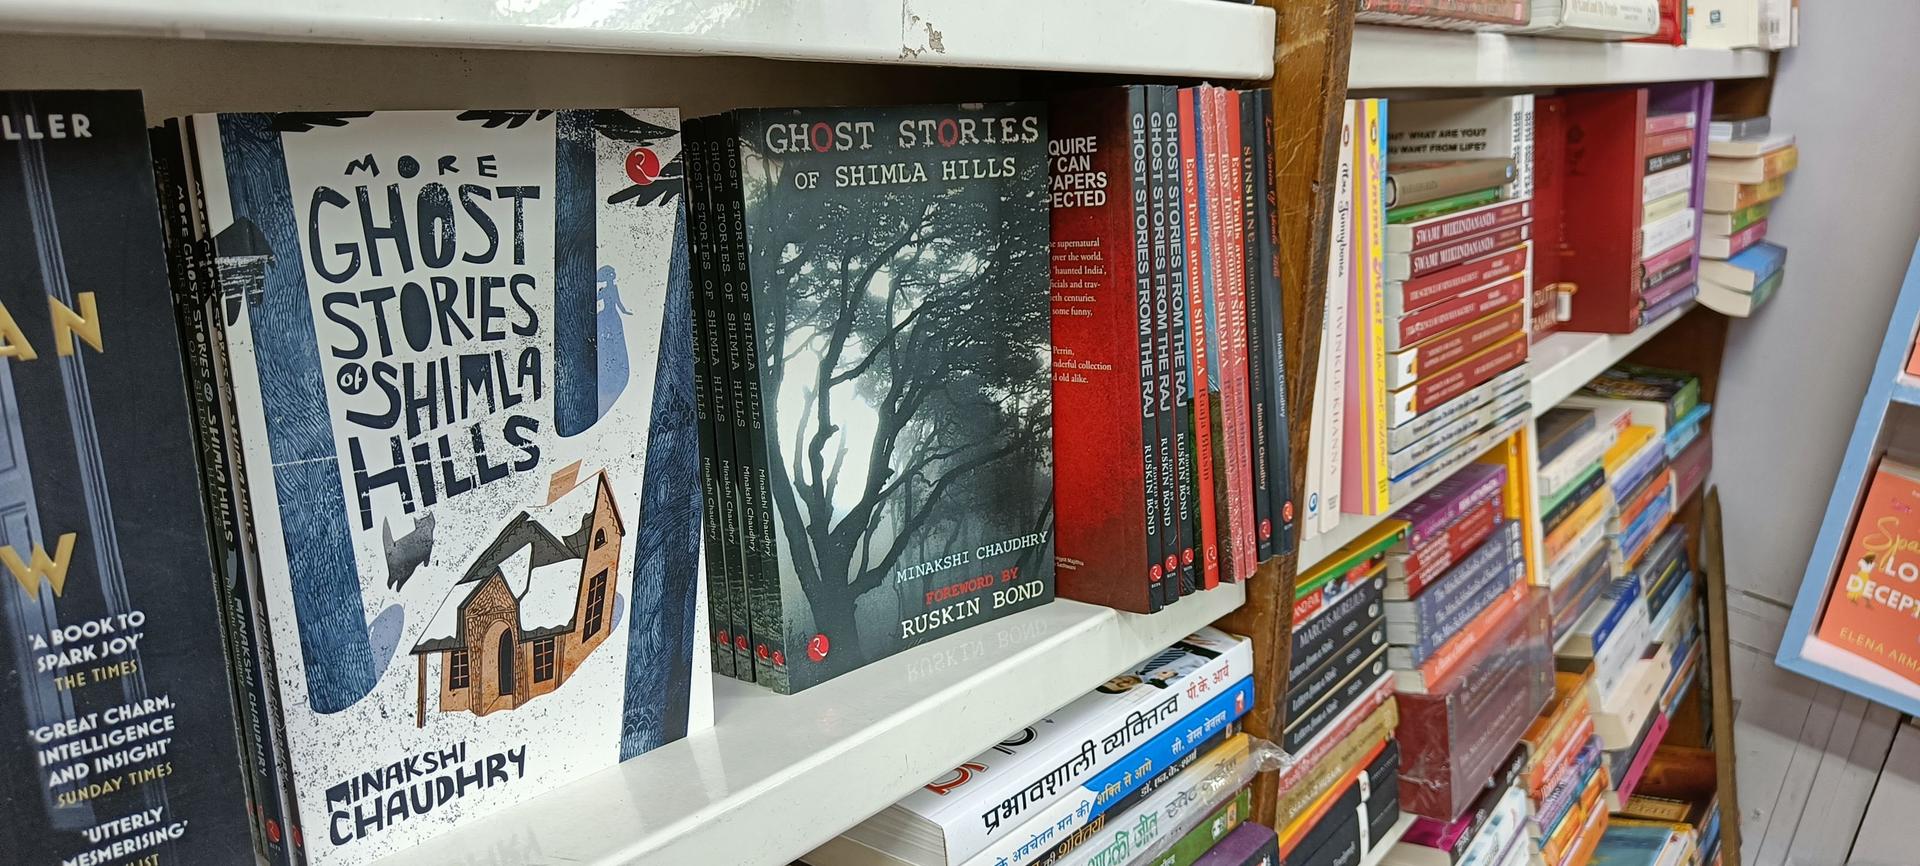 Ghost tales of Indian hills are a popular category in Indian literature